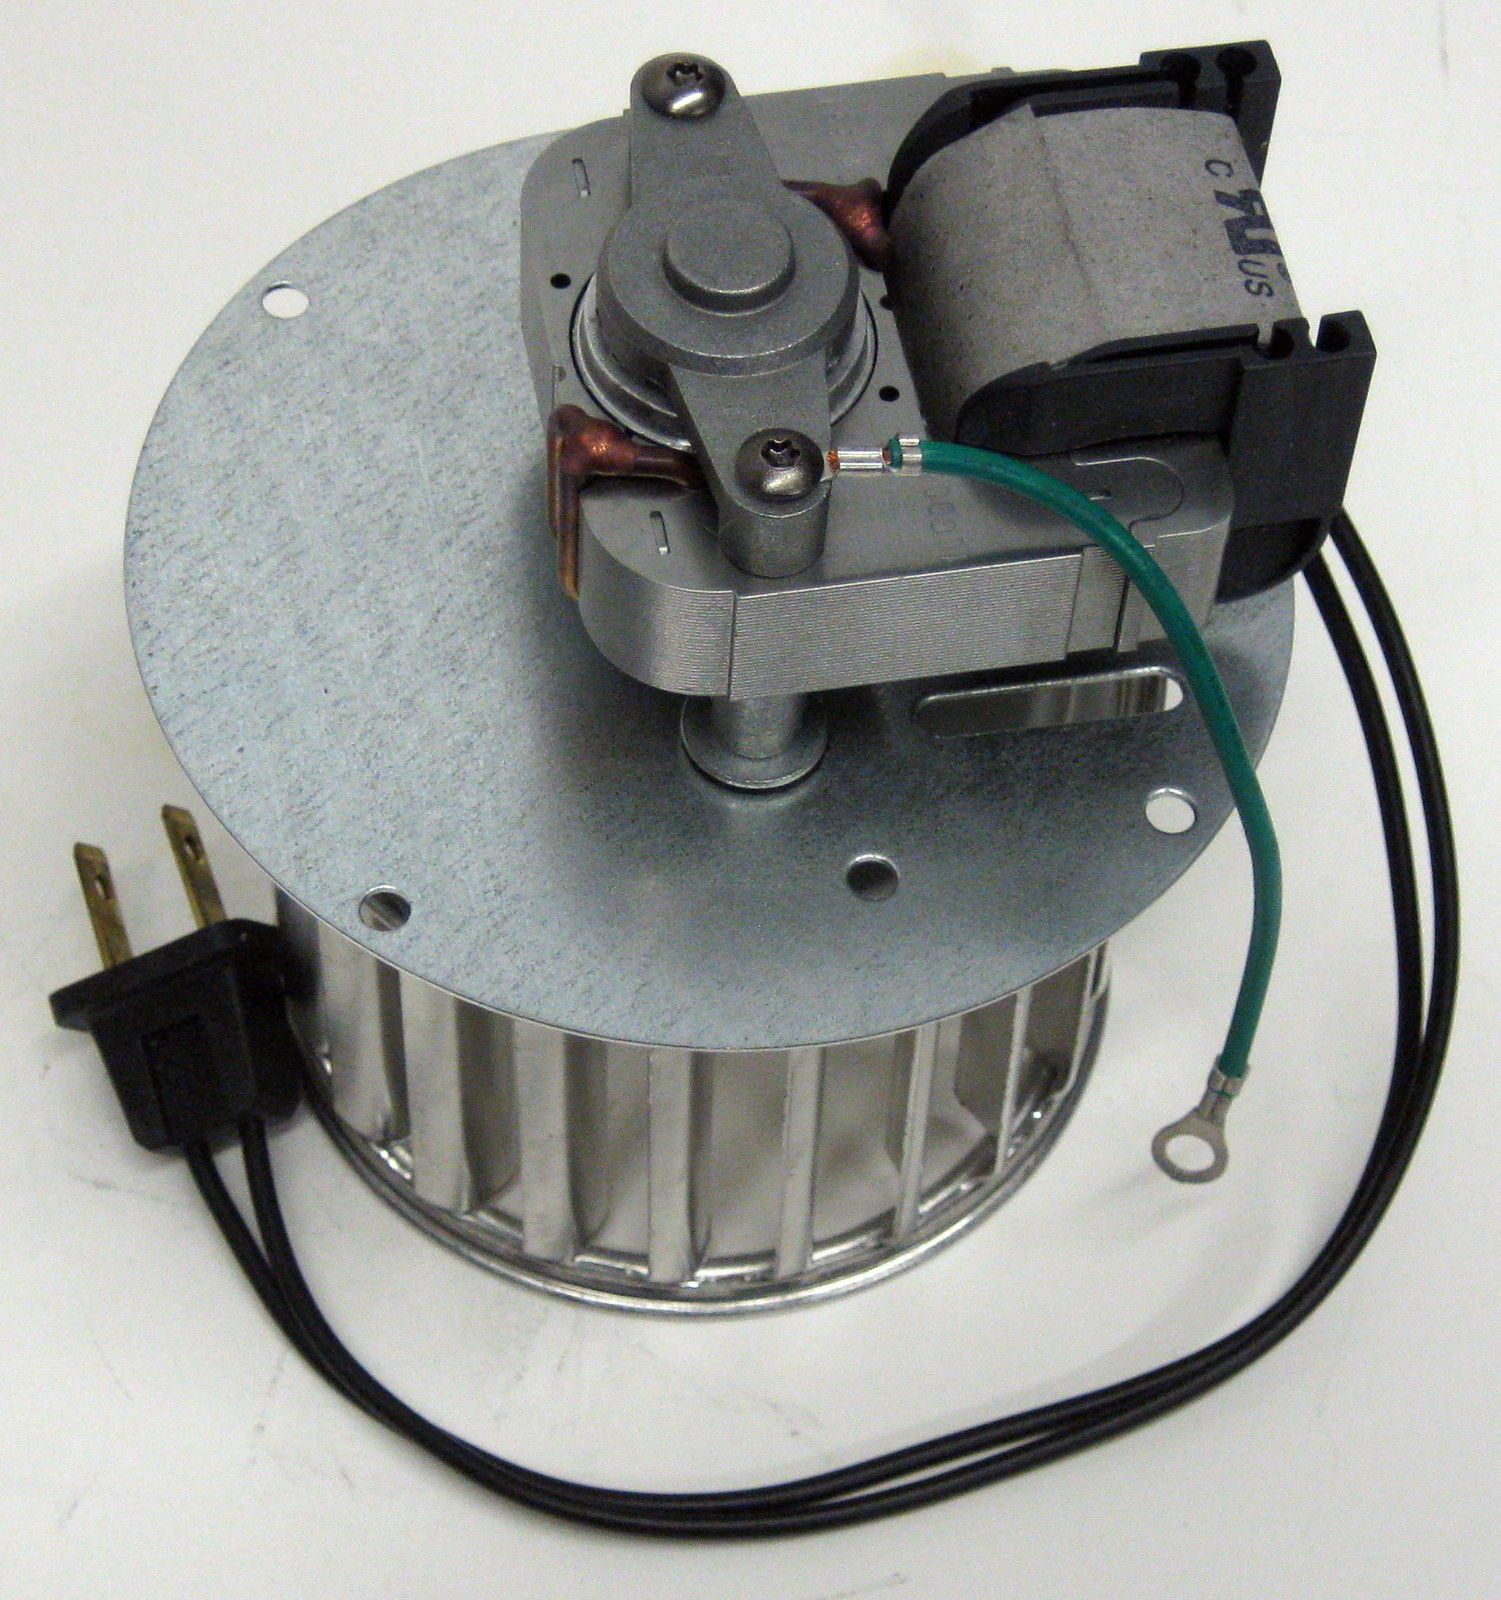 Broan Bathroom Fan Motor Replacement Instructions Image Of intended for proportions 1501 X 1600